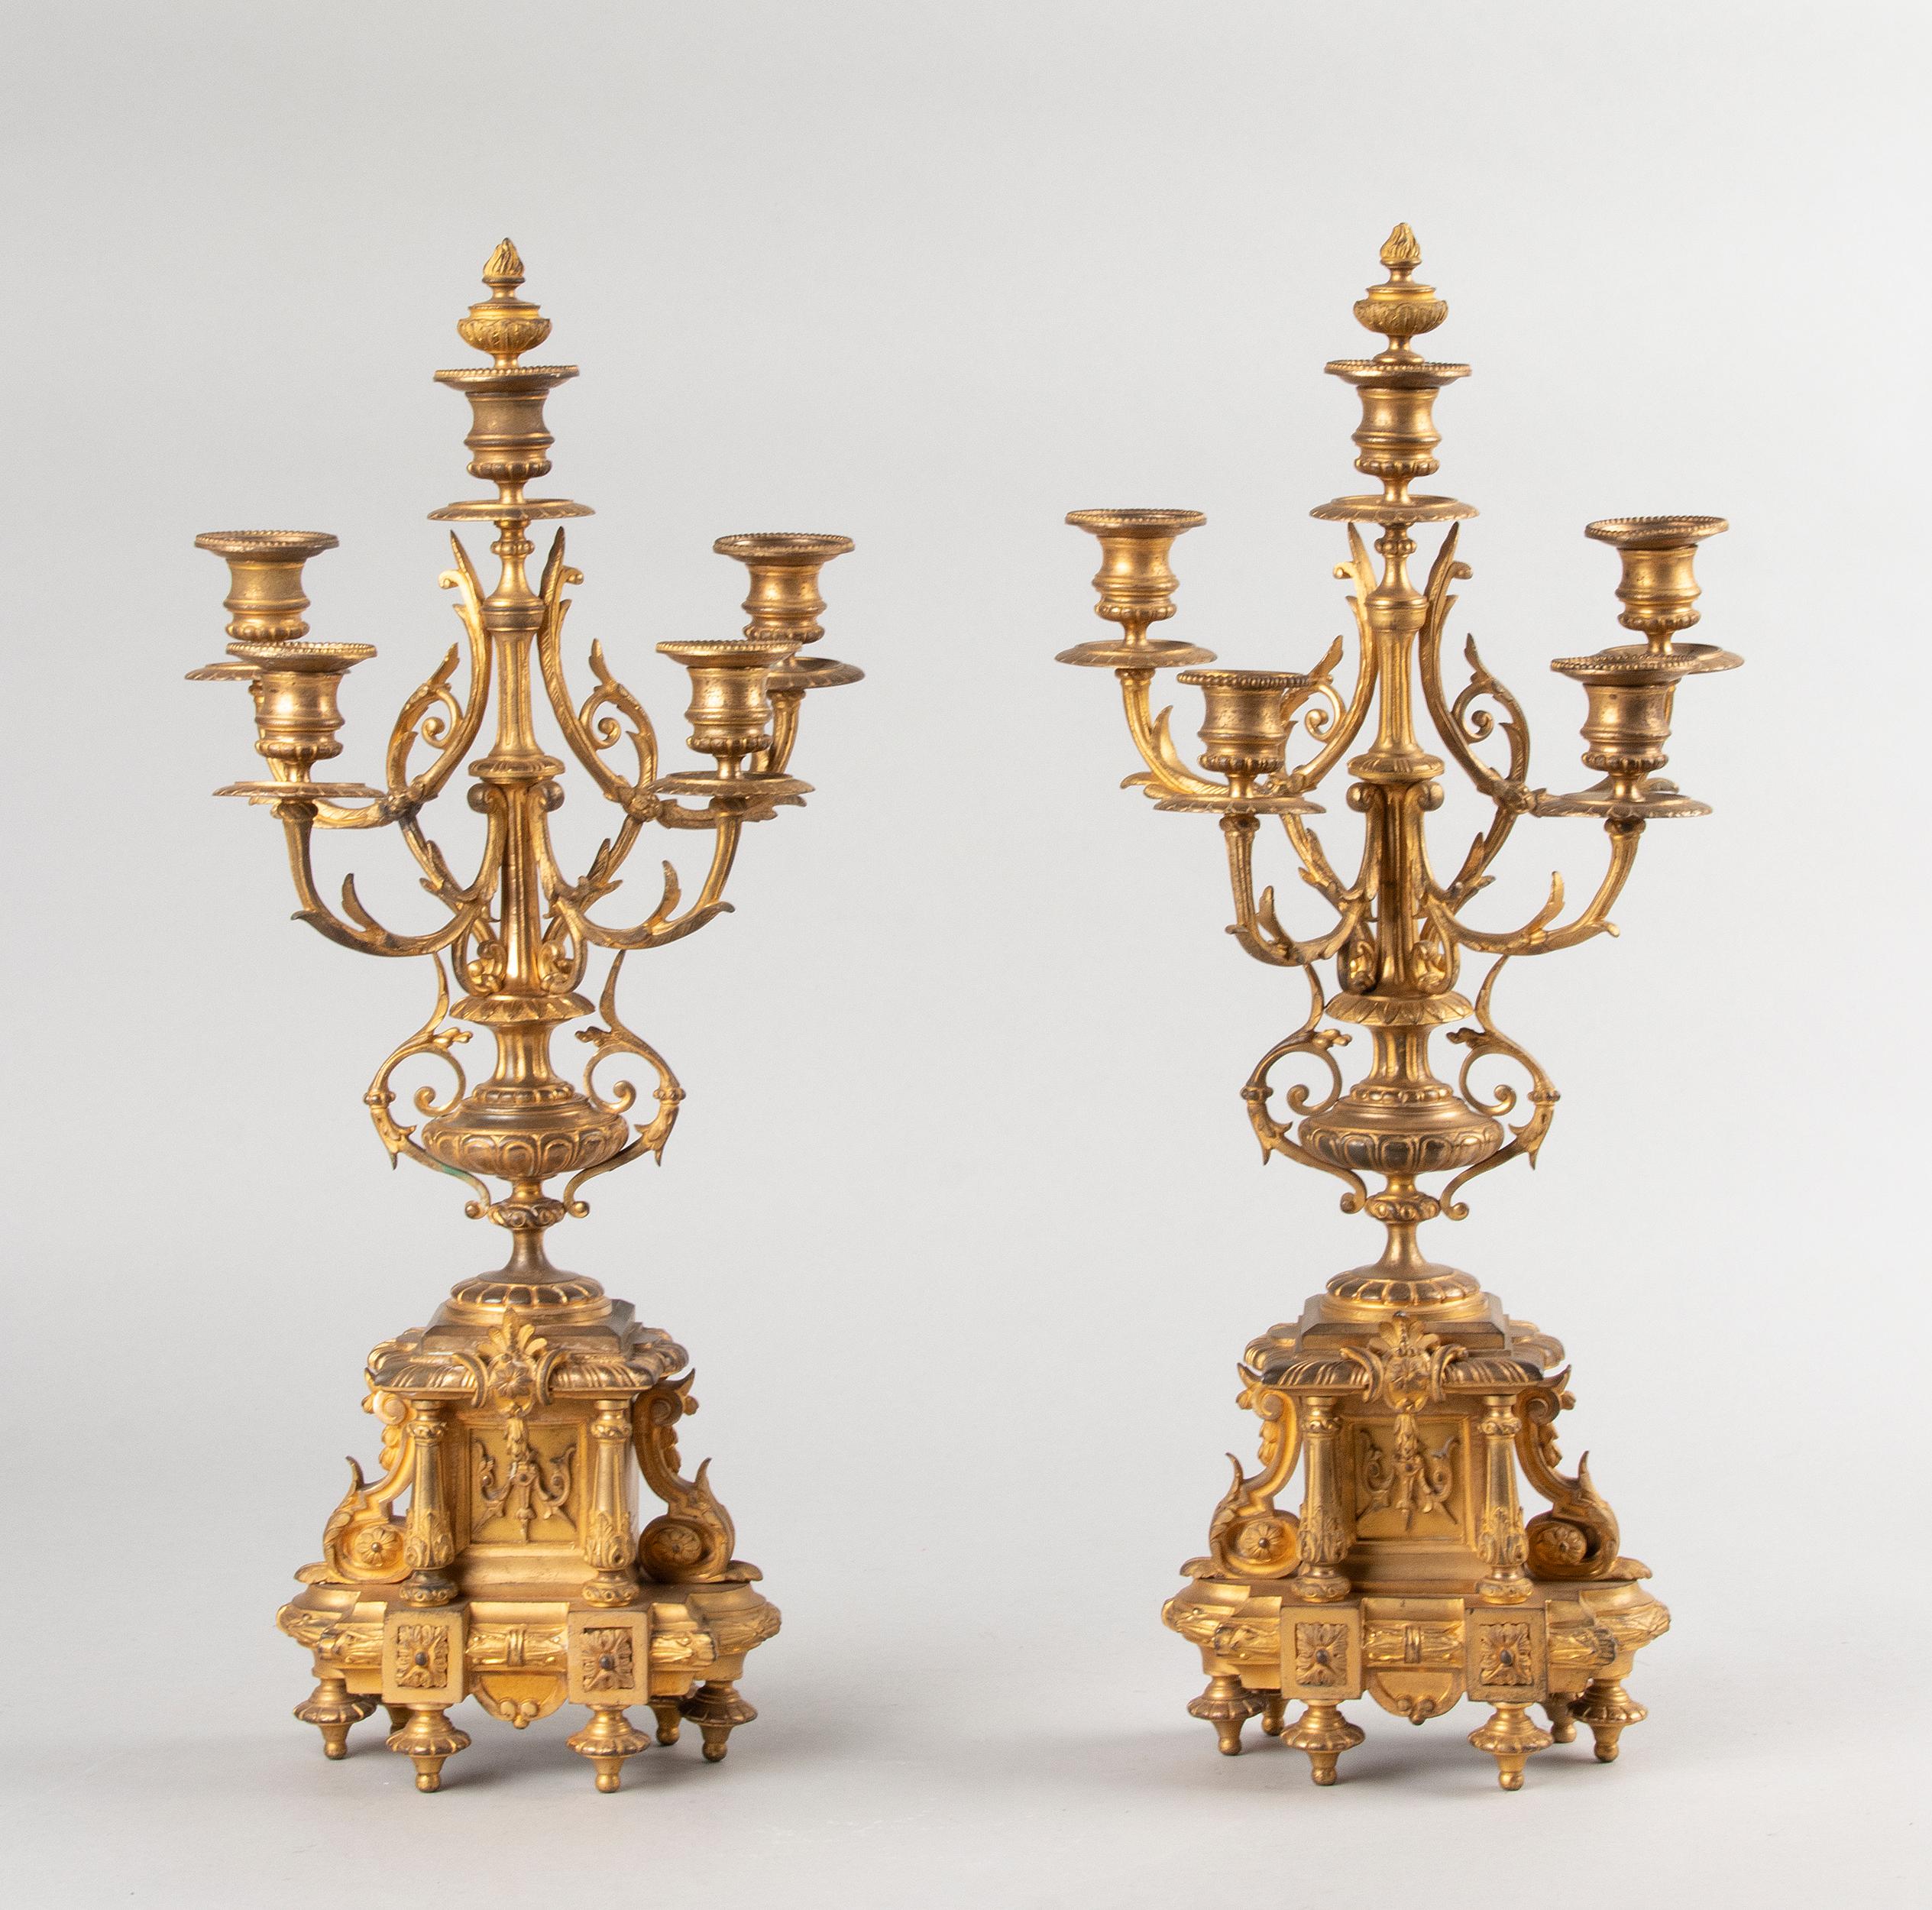 A fine pair of French candelabras, made of fire-gilt bronze, in Louis XVI style. Each candlestick have five candleholders. The center candle have a cap at the top, it can take of and should be used for quenching the candles. This pair of